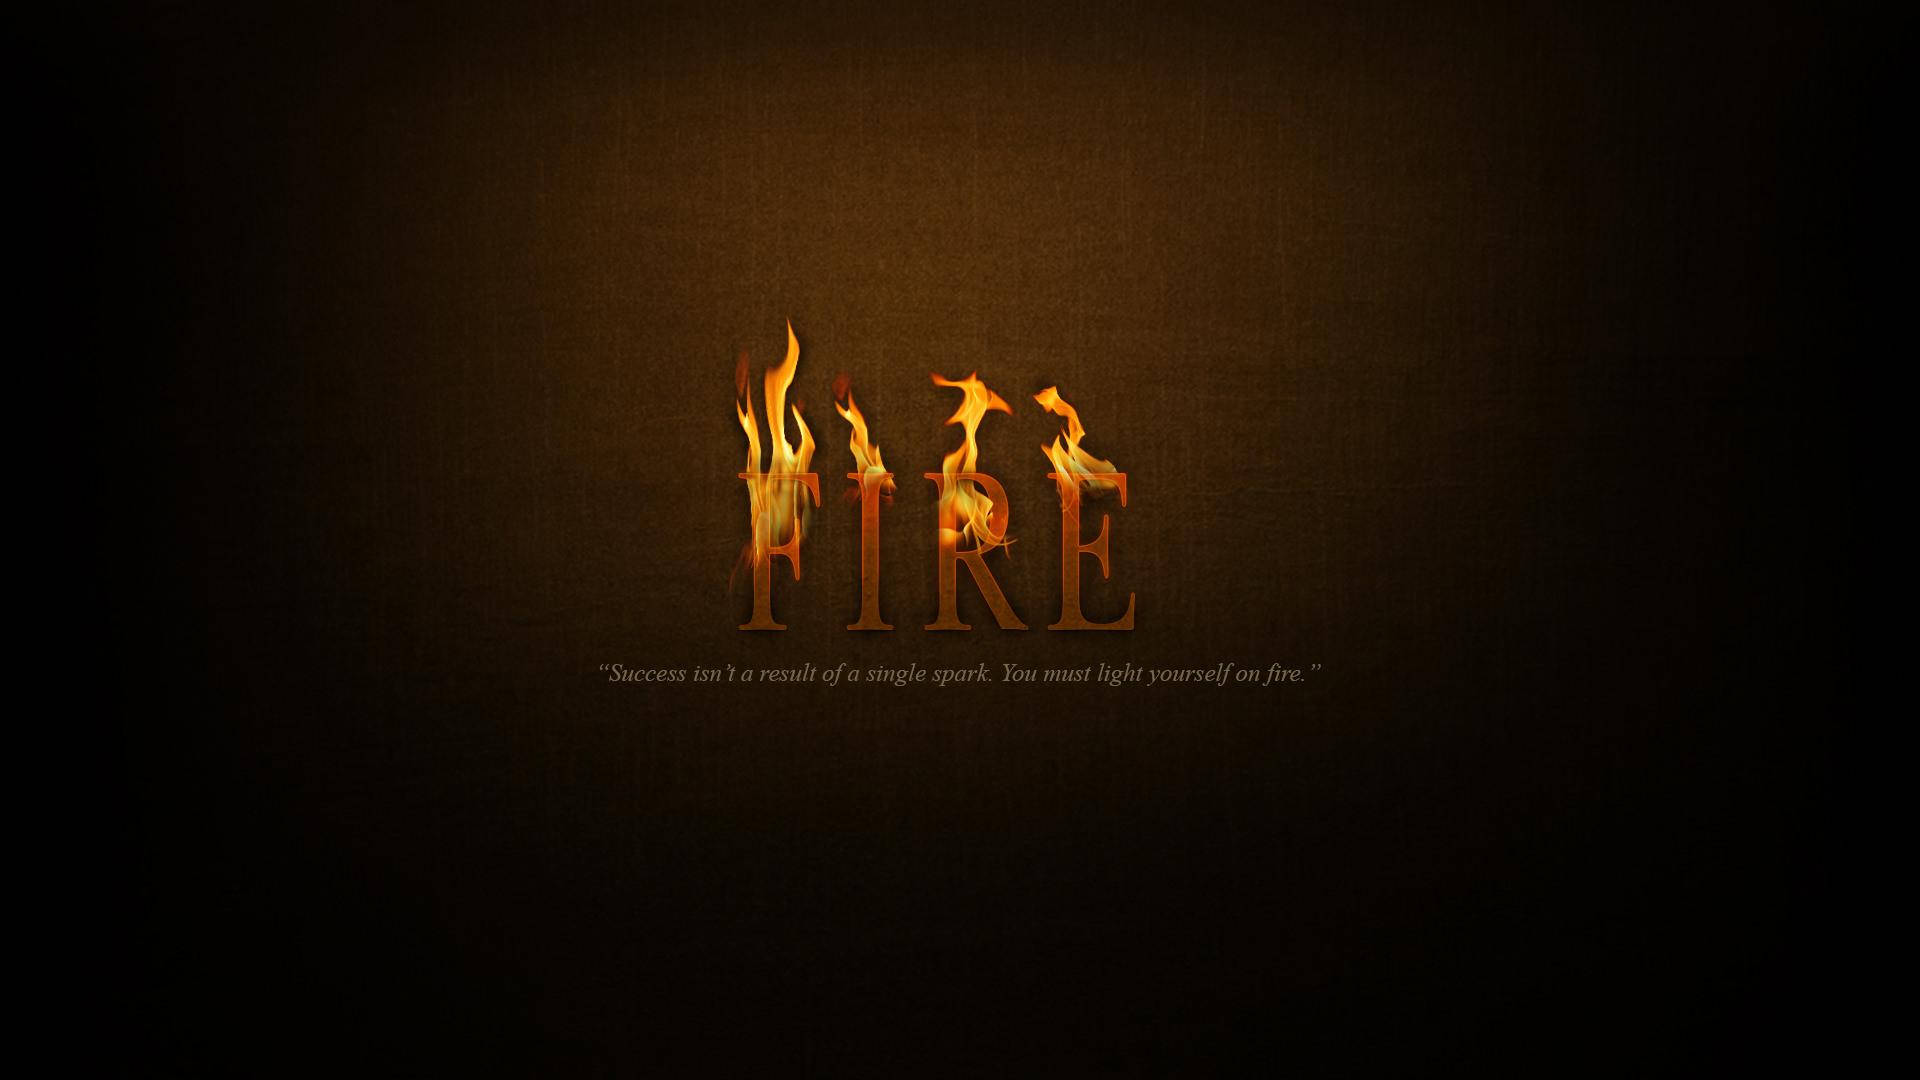 Motivational Hd Quote With Blazing Fire